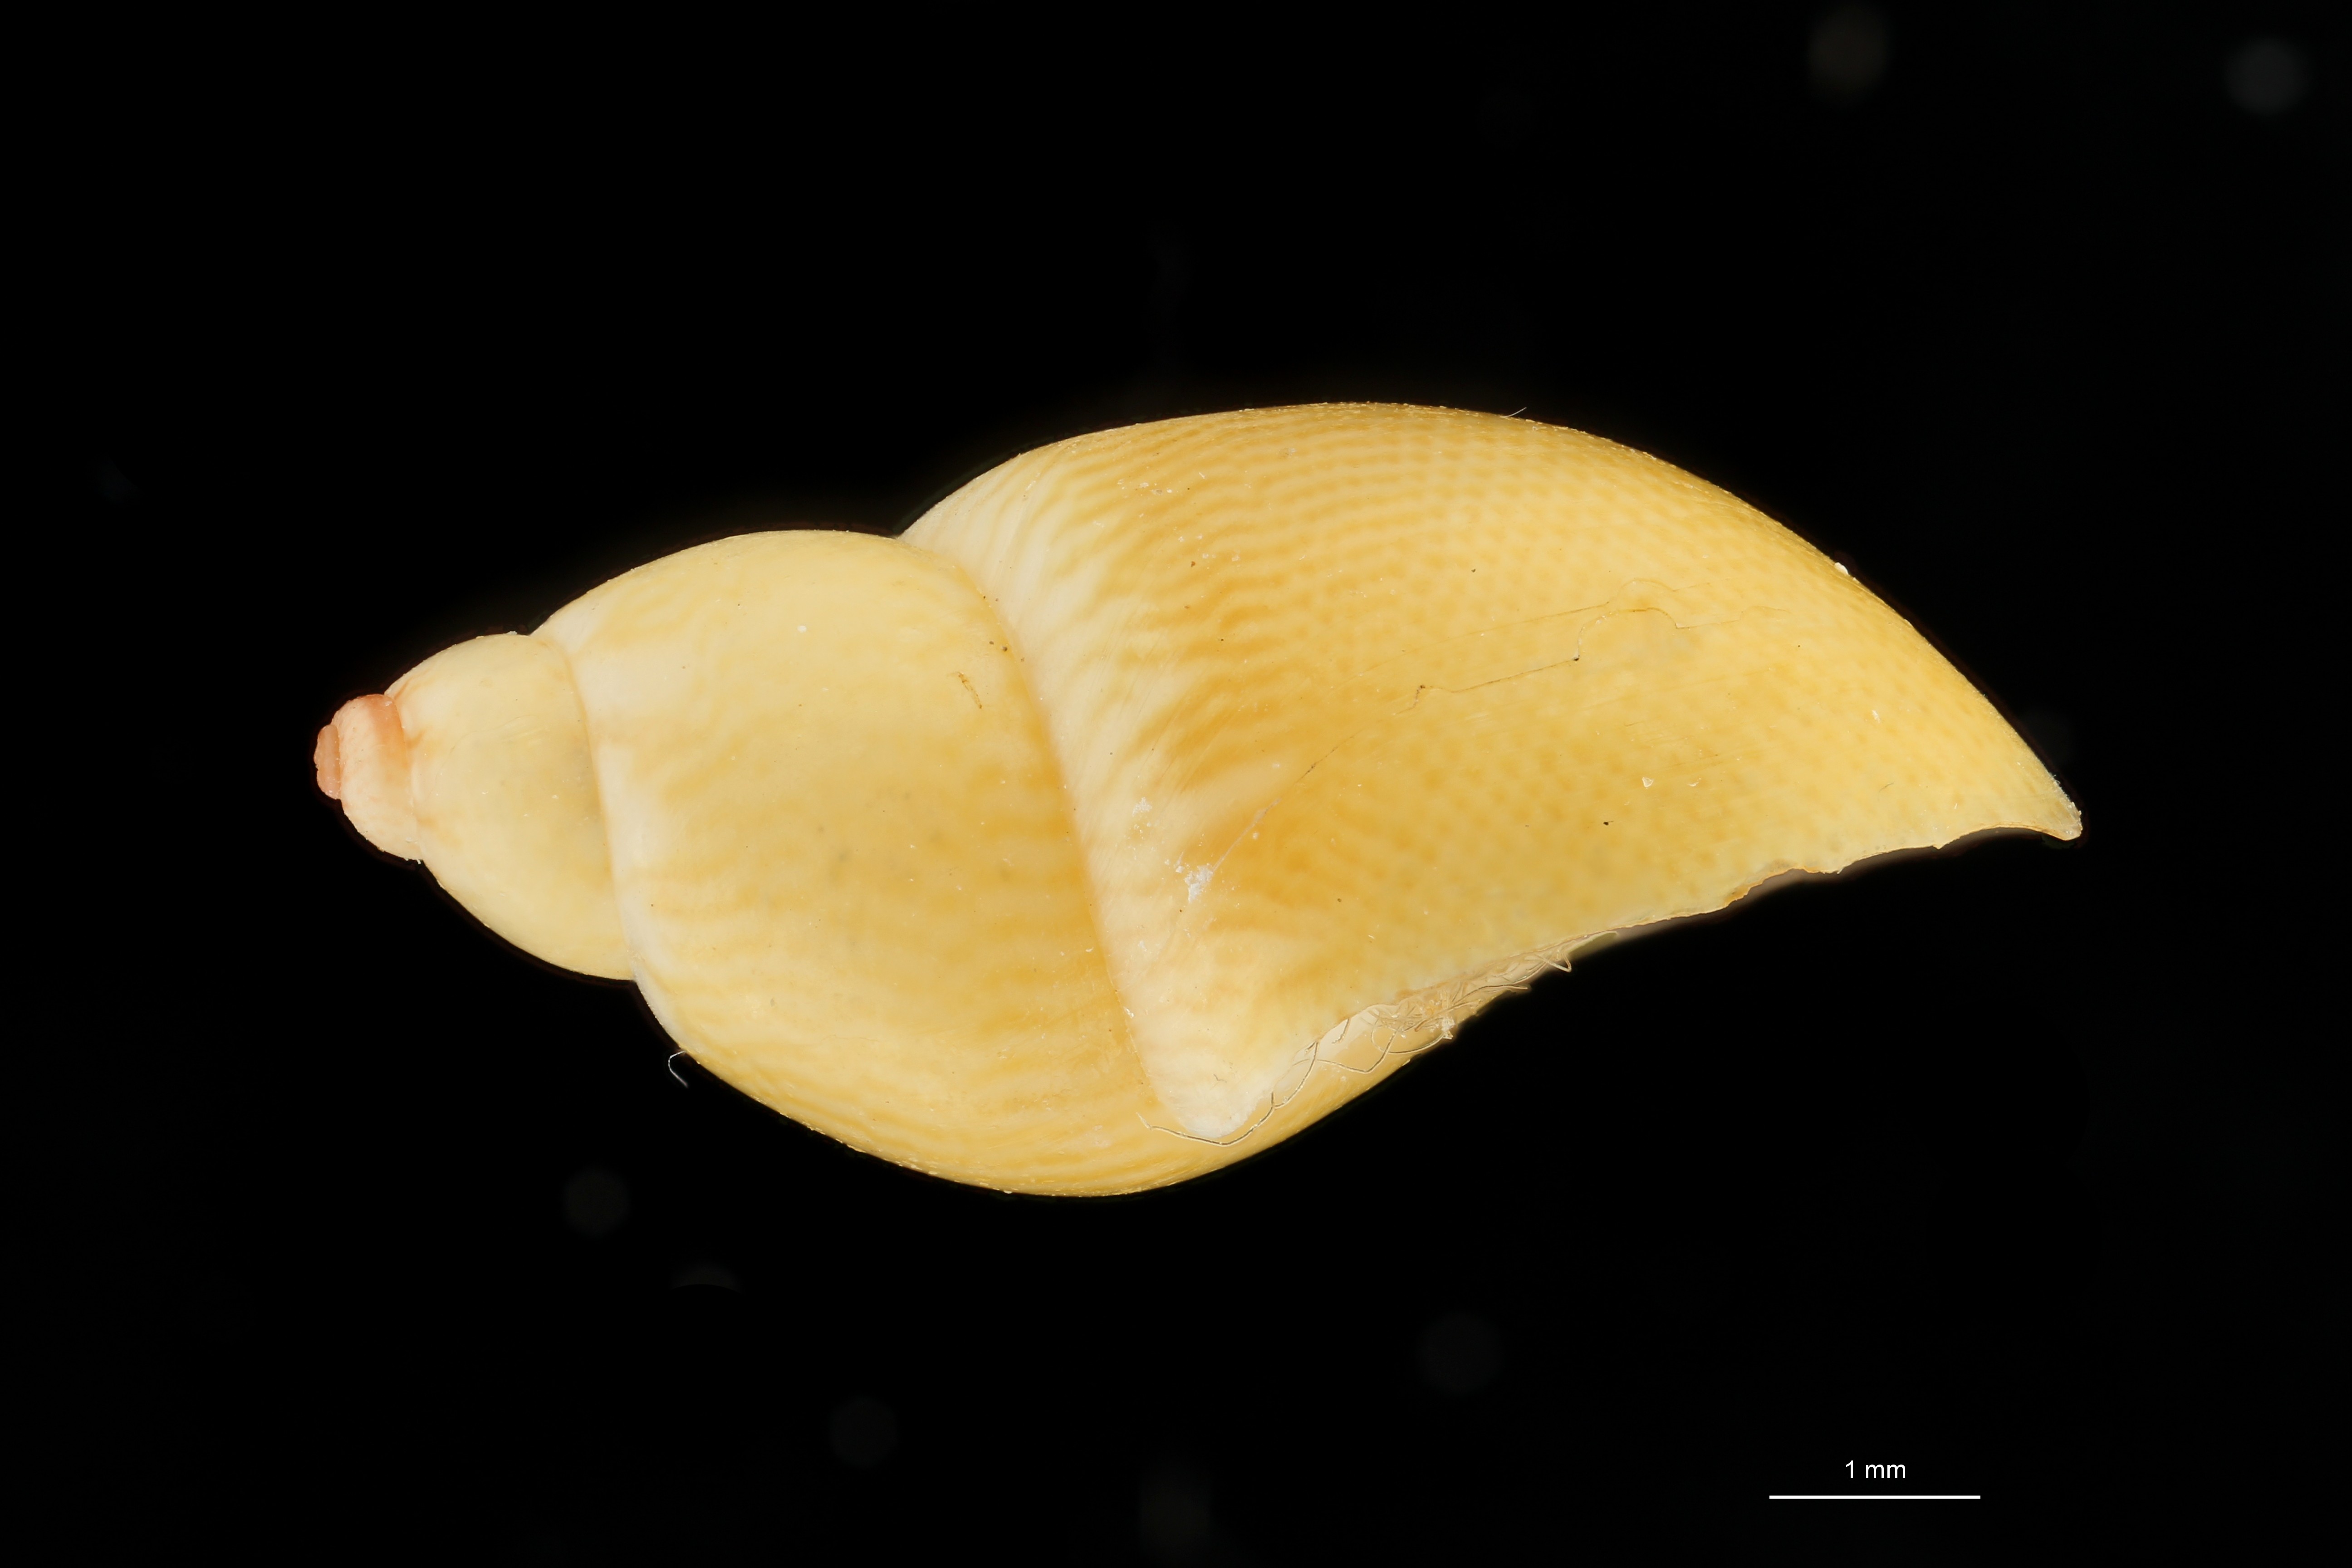 BE-RBINS-INV HOLOTYPE MT 38 Phasianella speciosa var. aurea LATERAL ZS DMap Scaled.jpg